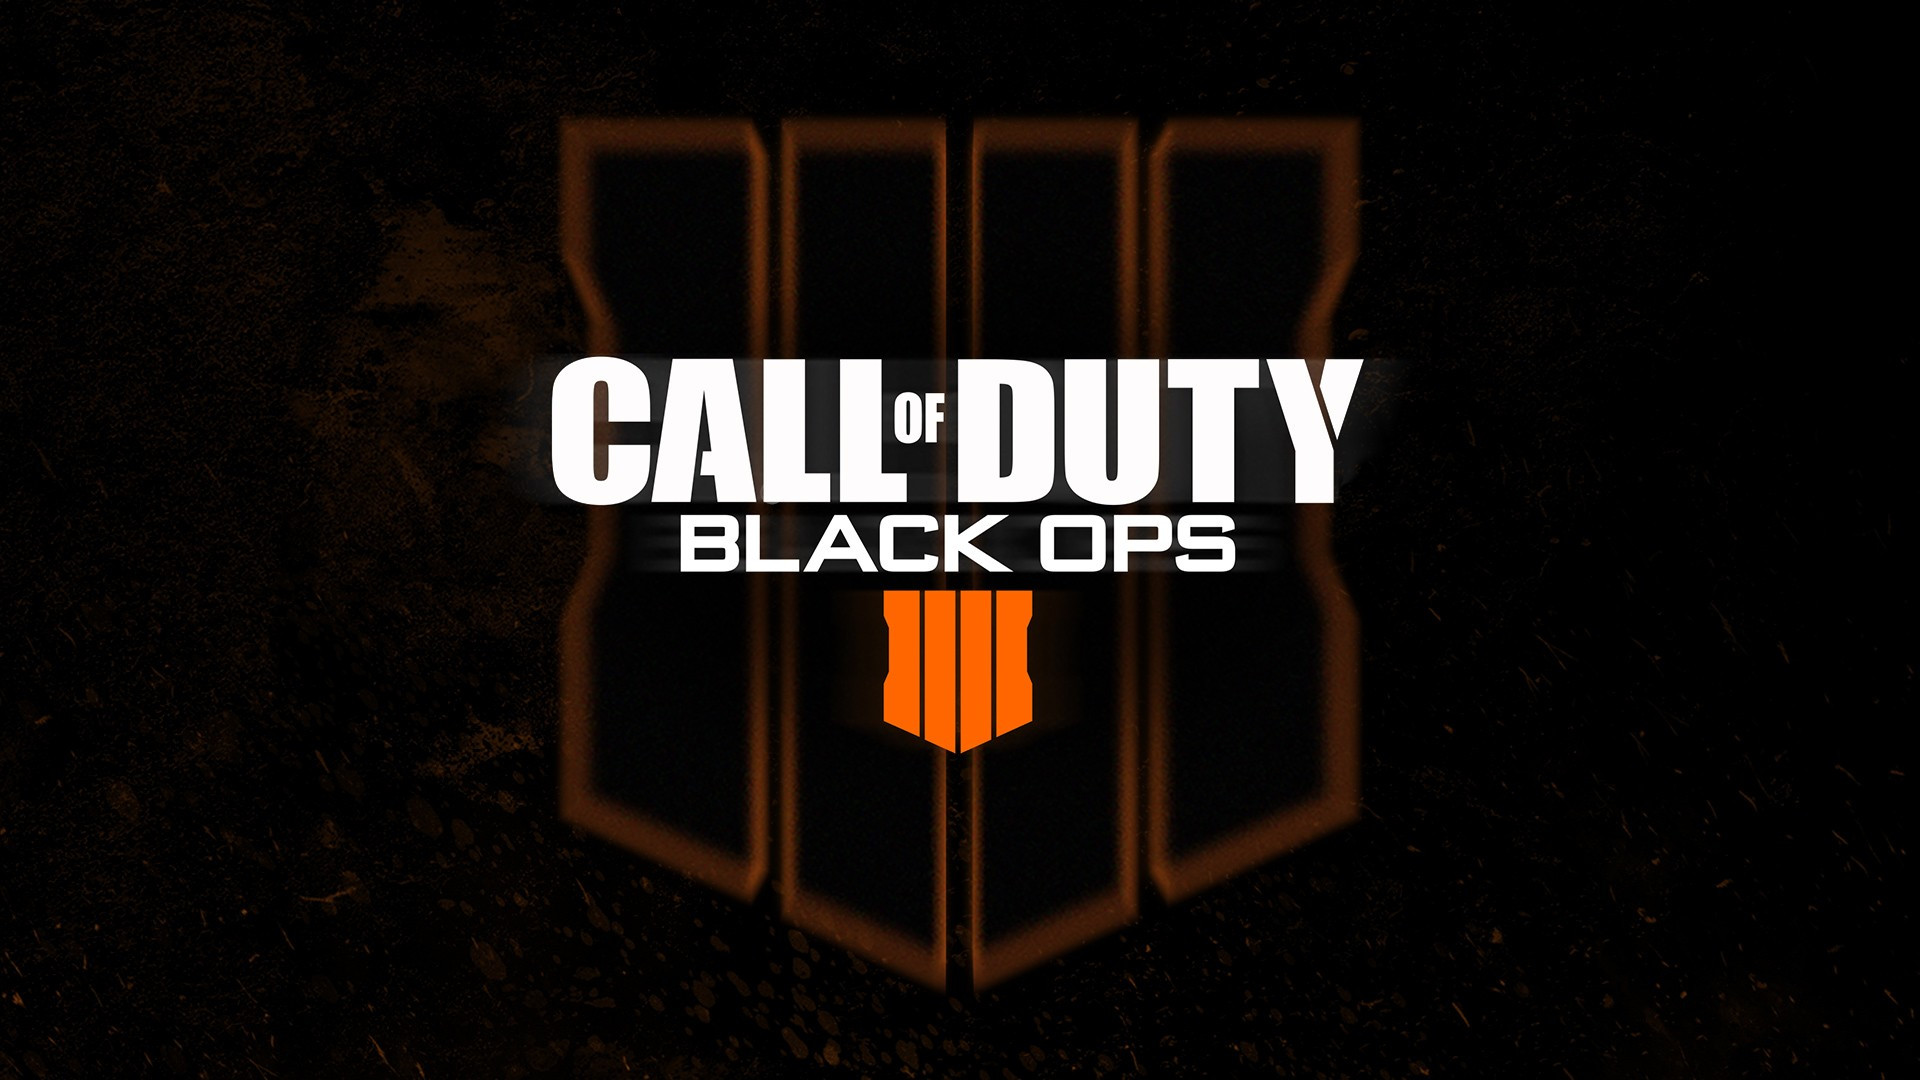 Call of Duty Black Ops 4 reveal wallpaper 1920x1080